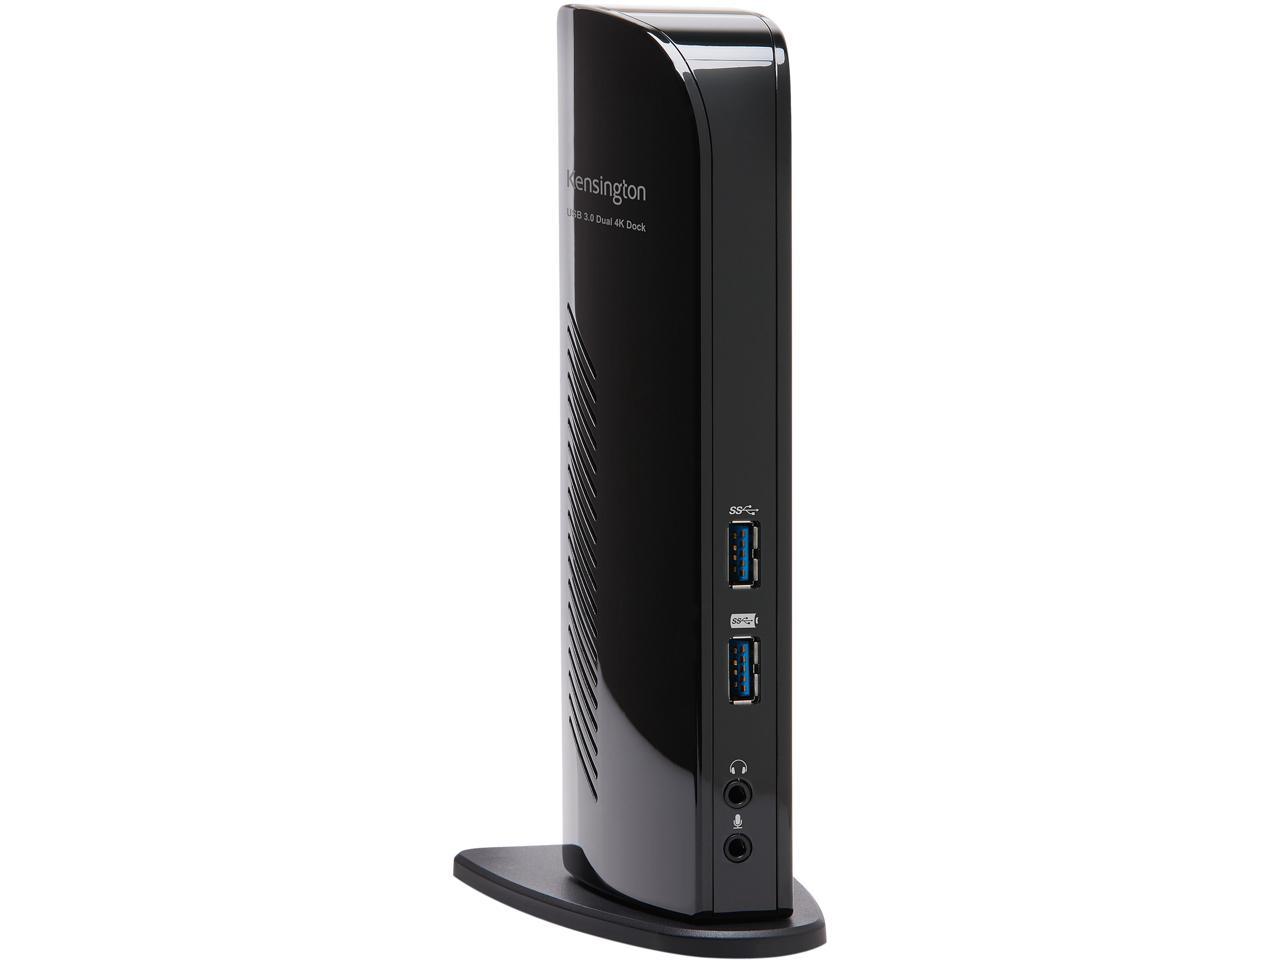 SD4100v 5Gbps USB 3.0 Dual 4K Docking Station - DP++/DP++ - Win/Mac/Chrome (3m Cable Included)